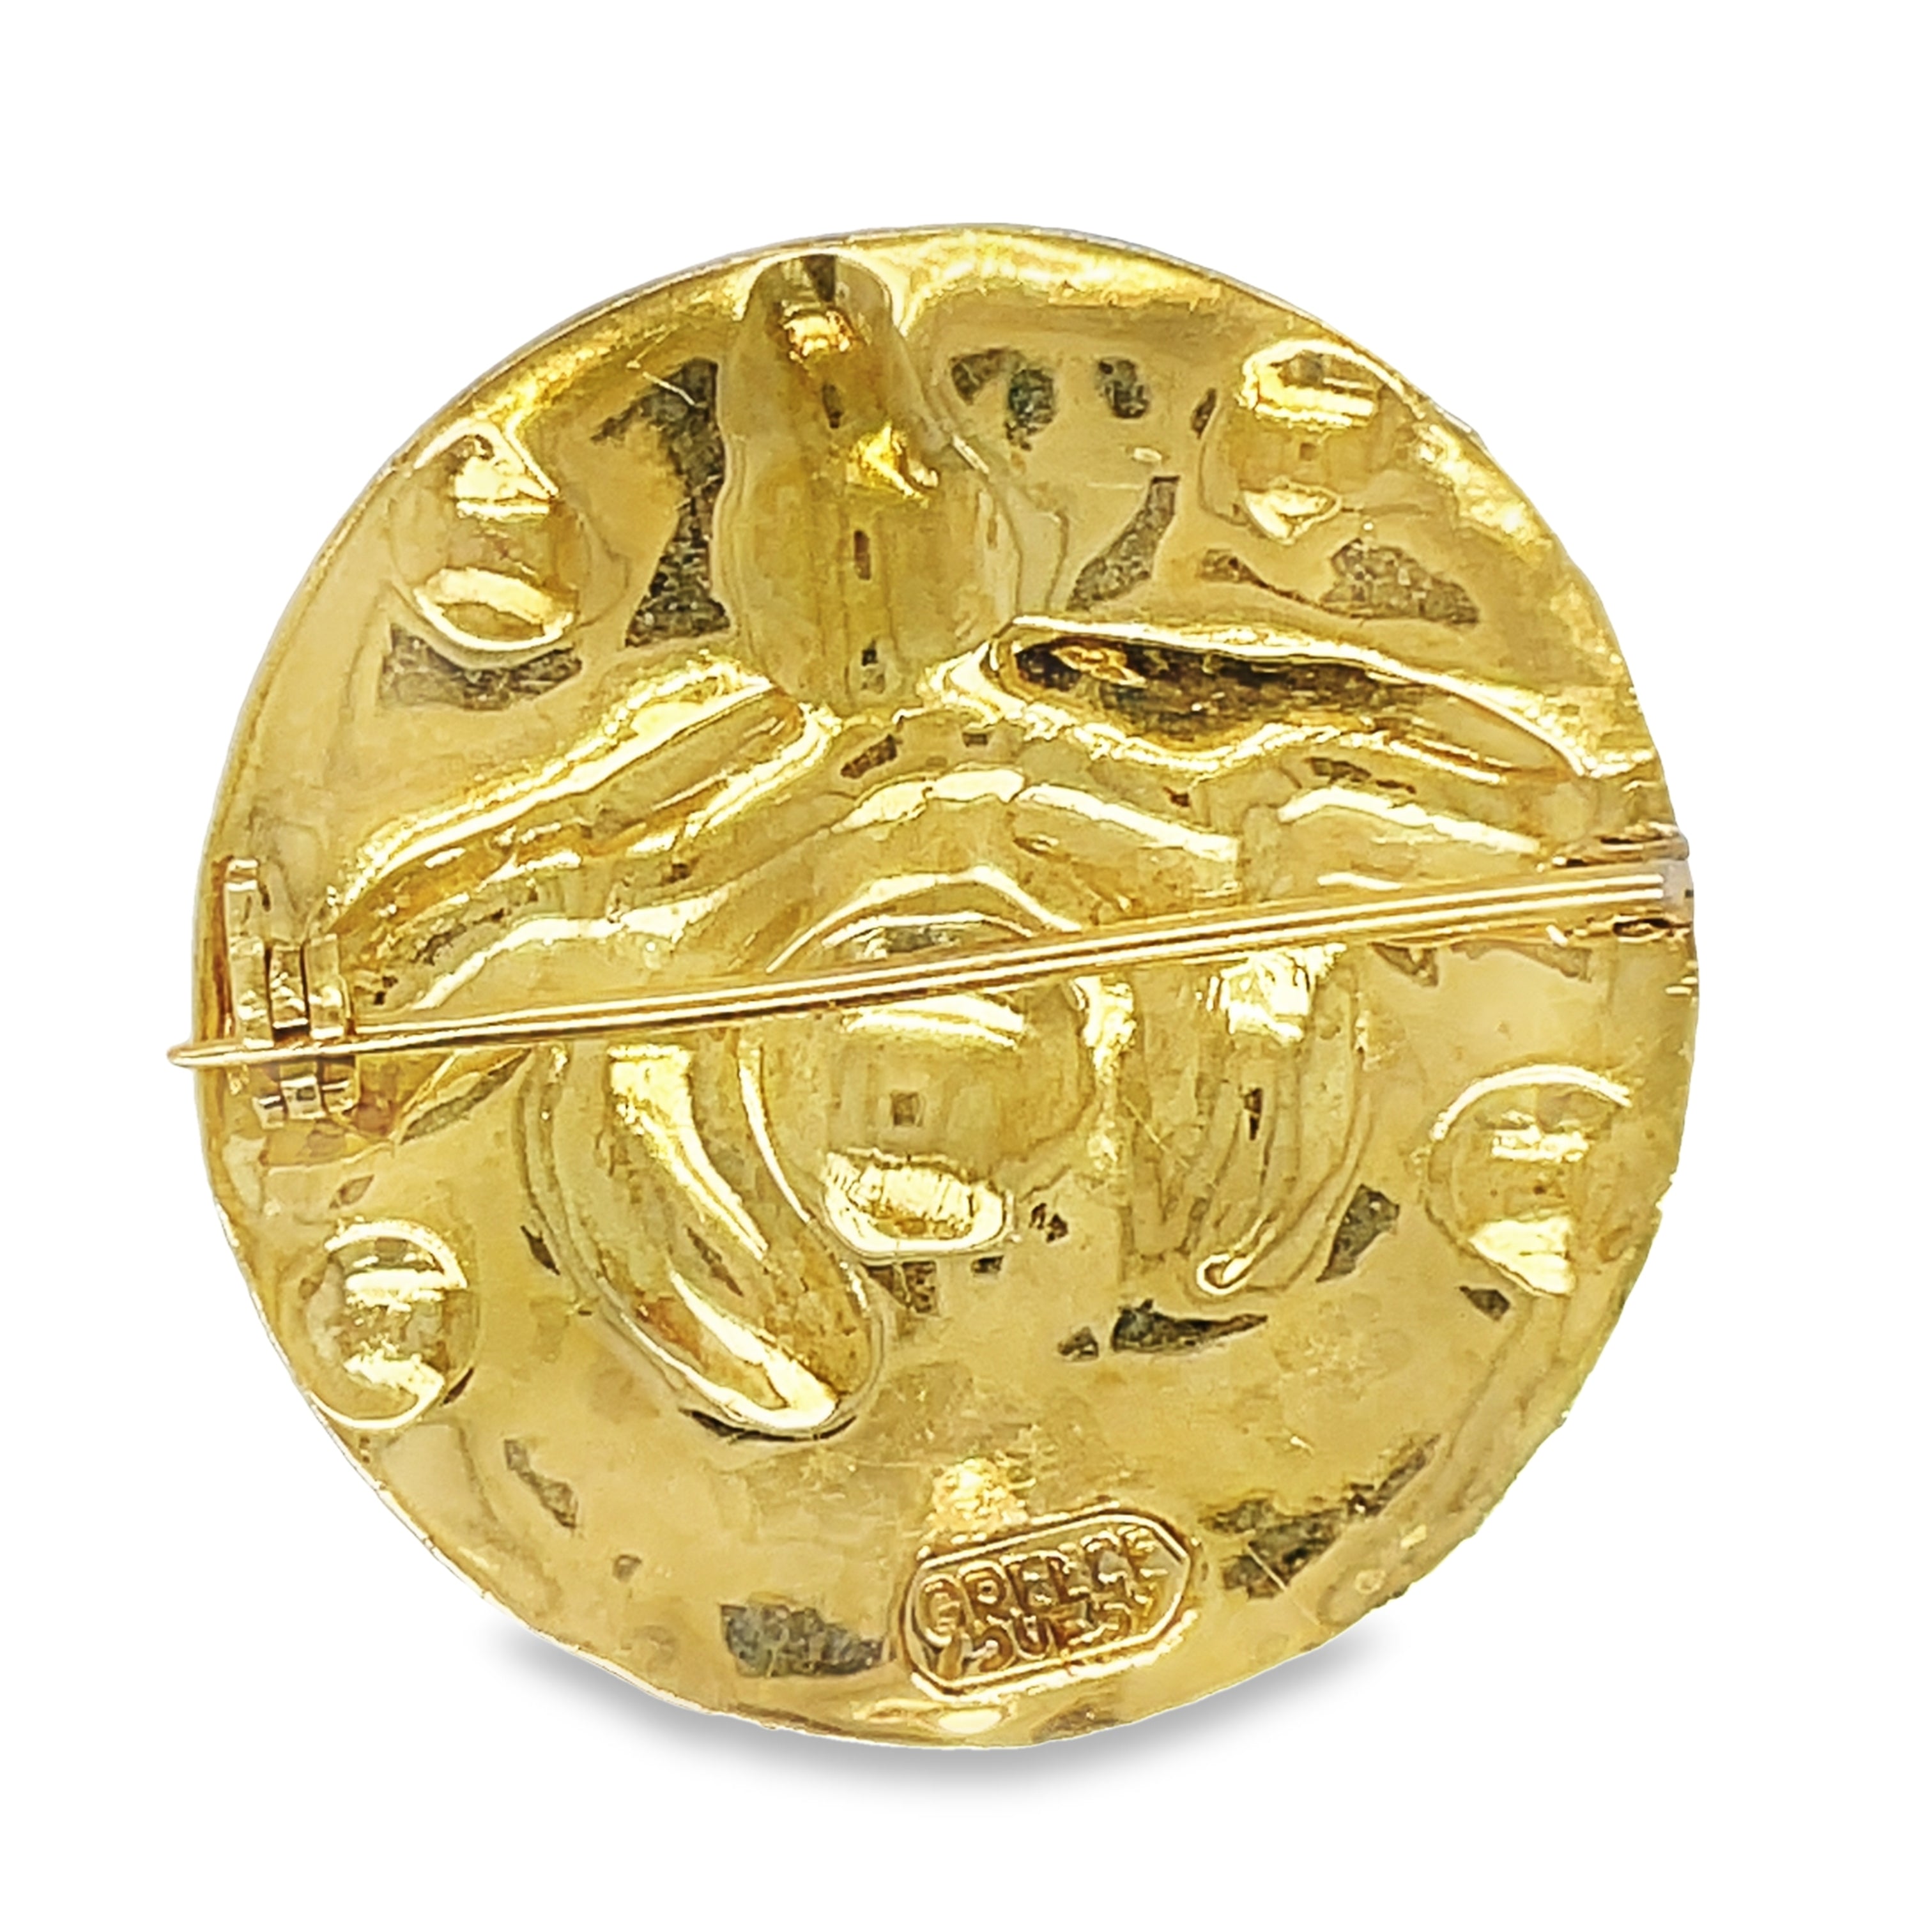 Enhance your outfit with the elegance of our Queen Bee Greek Design Yellow Gold Brooch. Made from 18k solid yellow gold, this round 1.5" pin boasts a beautiful matte finish and intricate carved design. Perfect for any occasion, embrace the queen bee within!